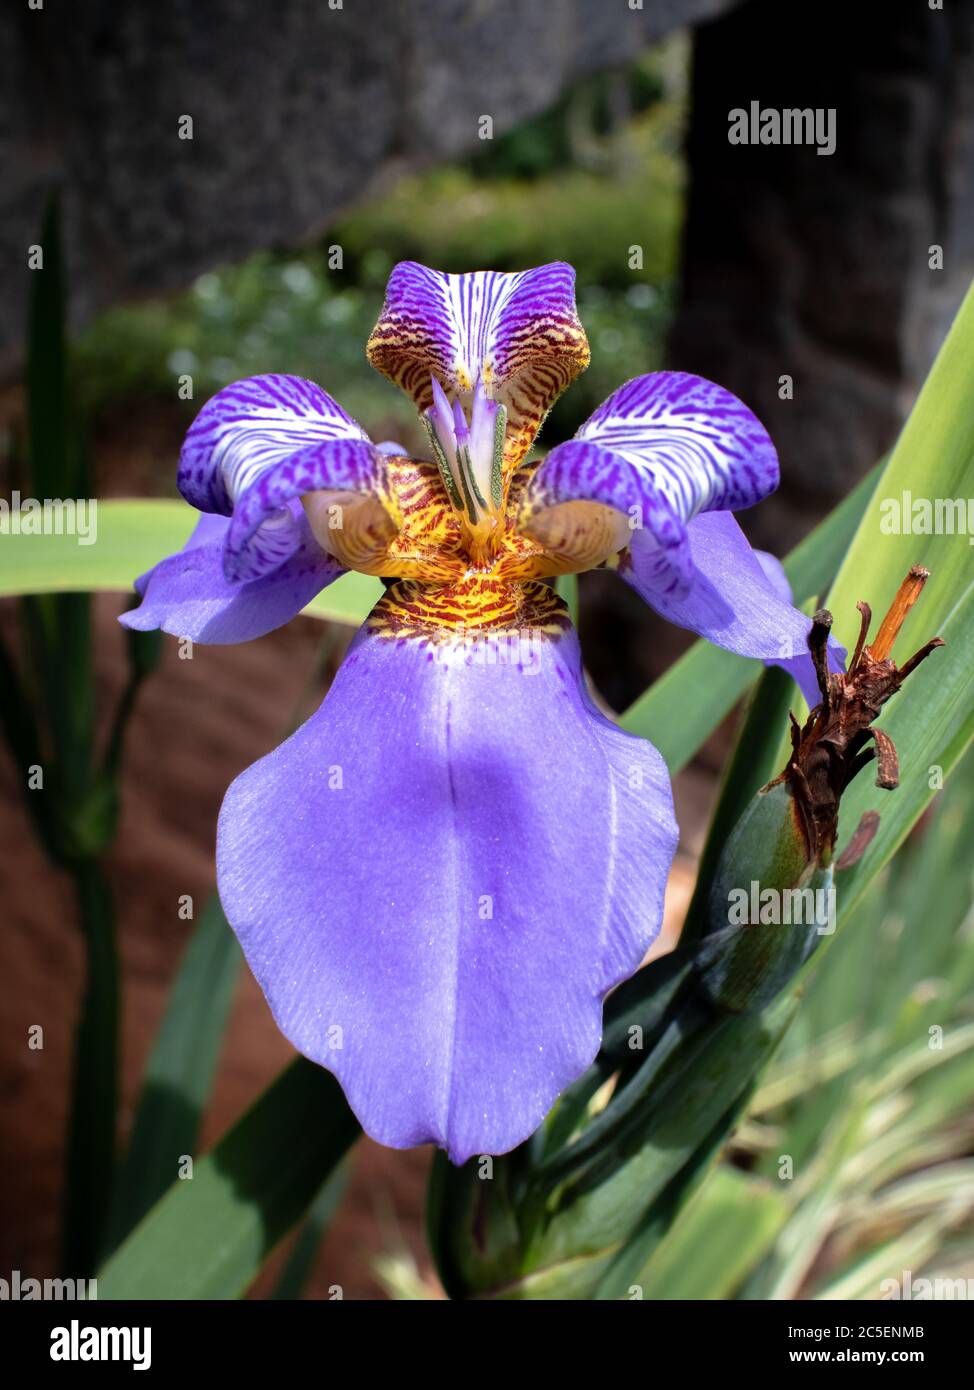 Close up of purple and white orchid flower, of the genus Neomarica candida, with green leaves background, Areal city, Rio de Janeiro state, Brazil Stock Photo